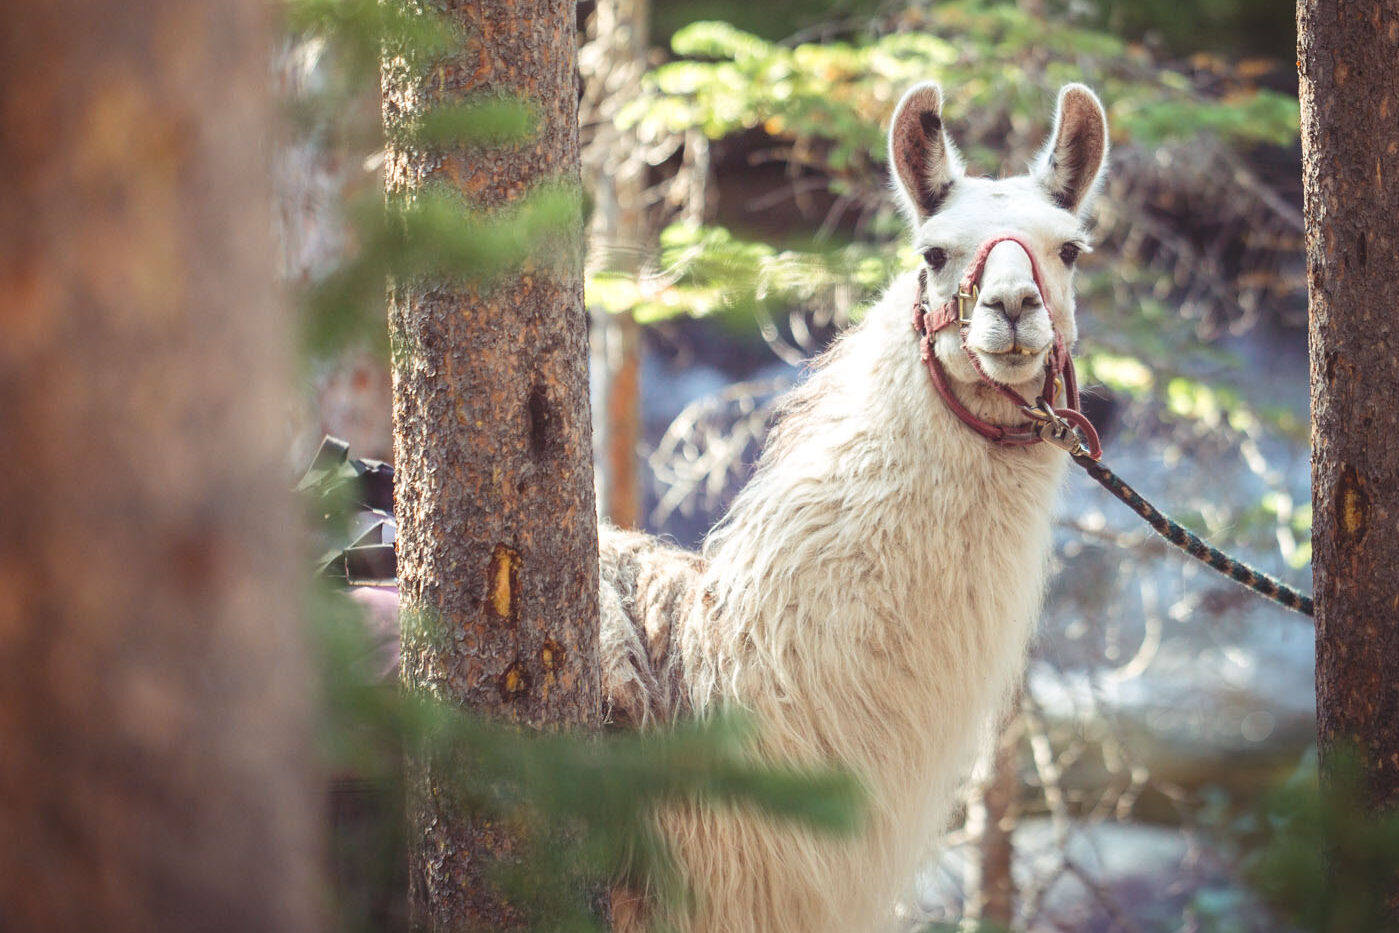 Llama being led down a trail in the Rocky Mountains of Colorado